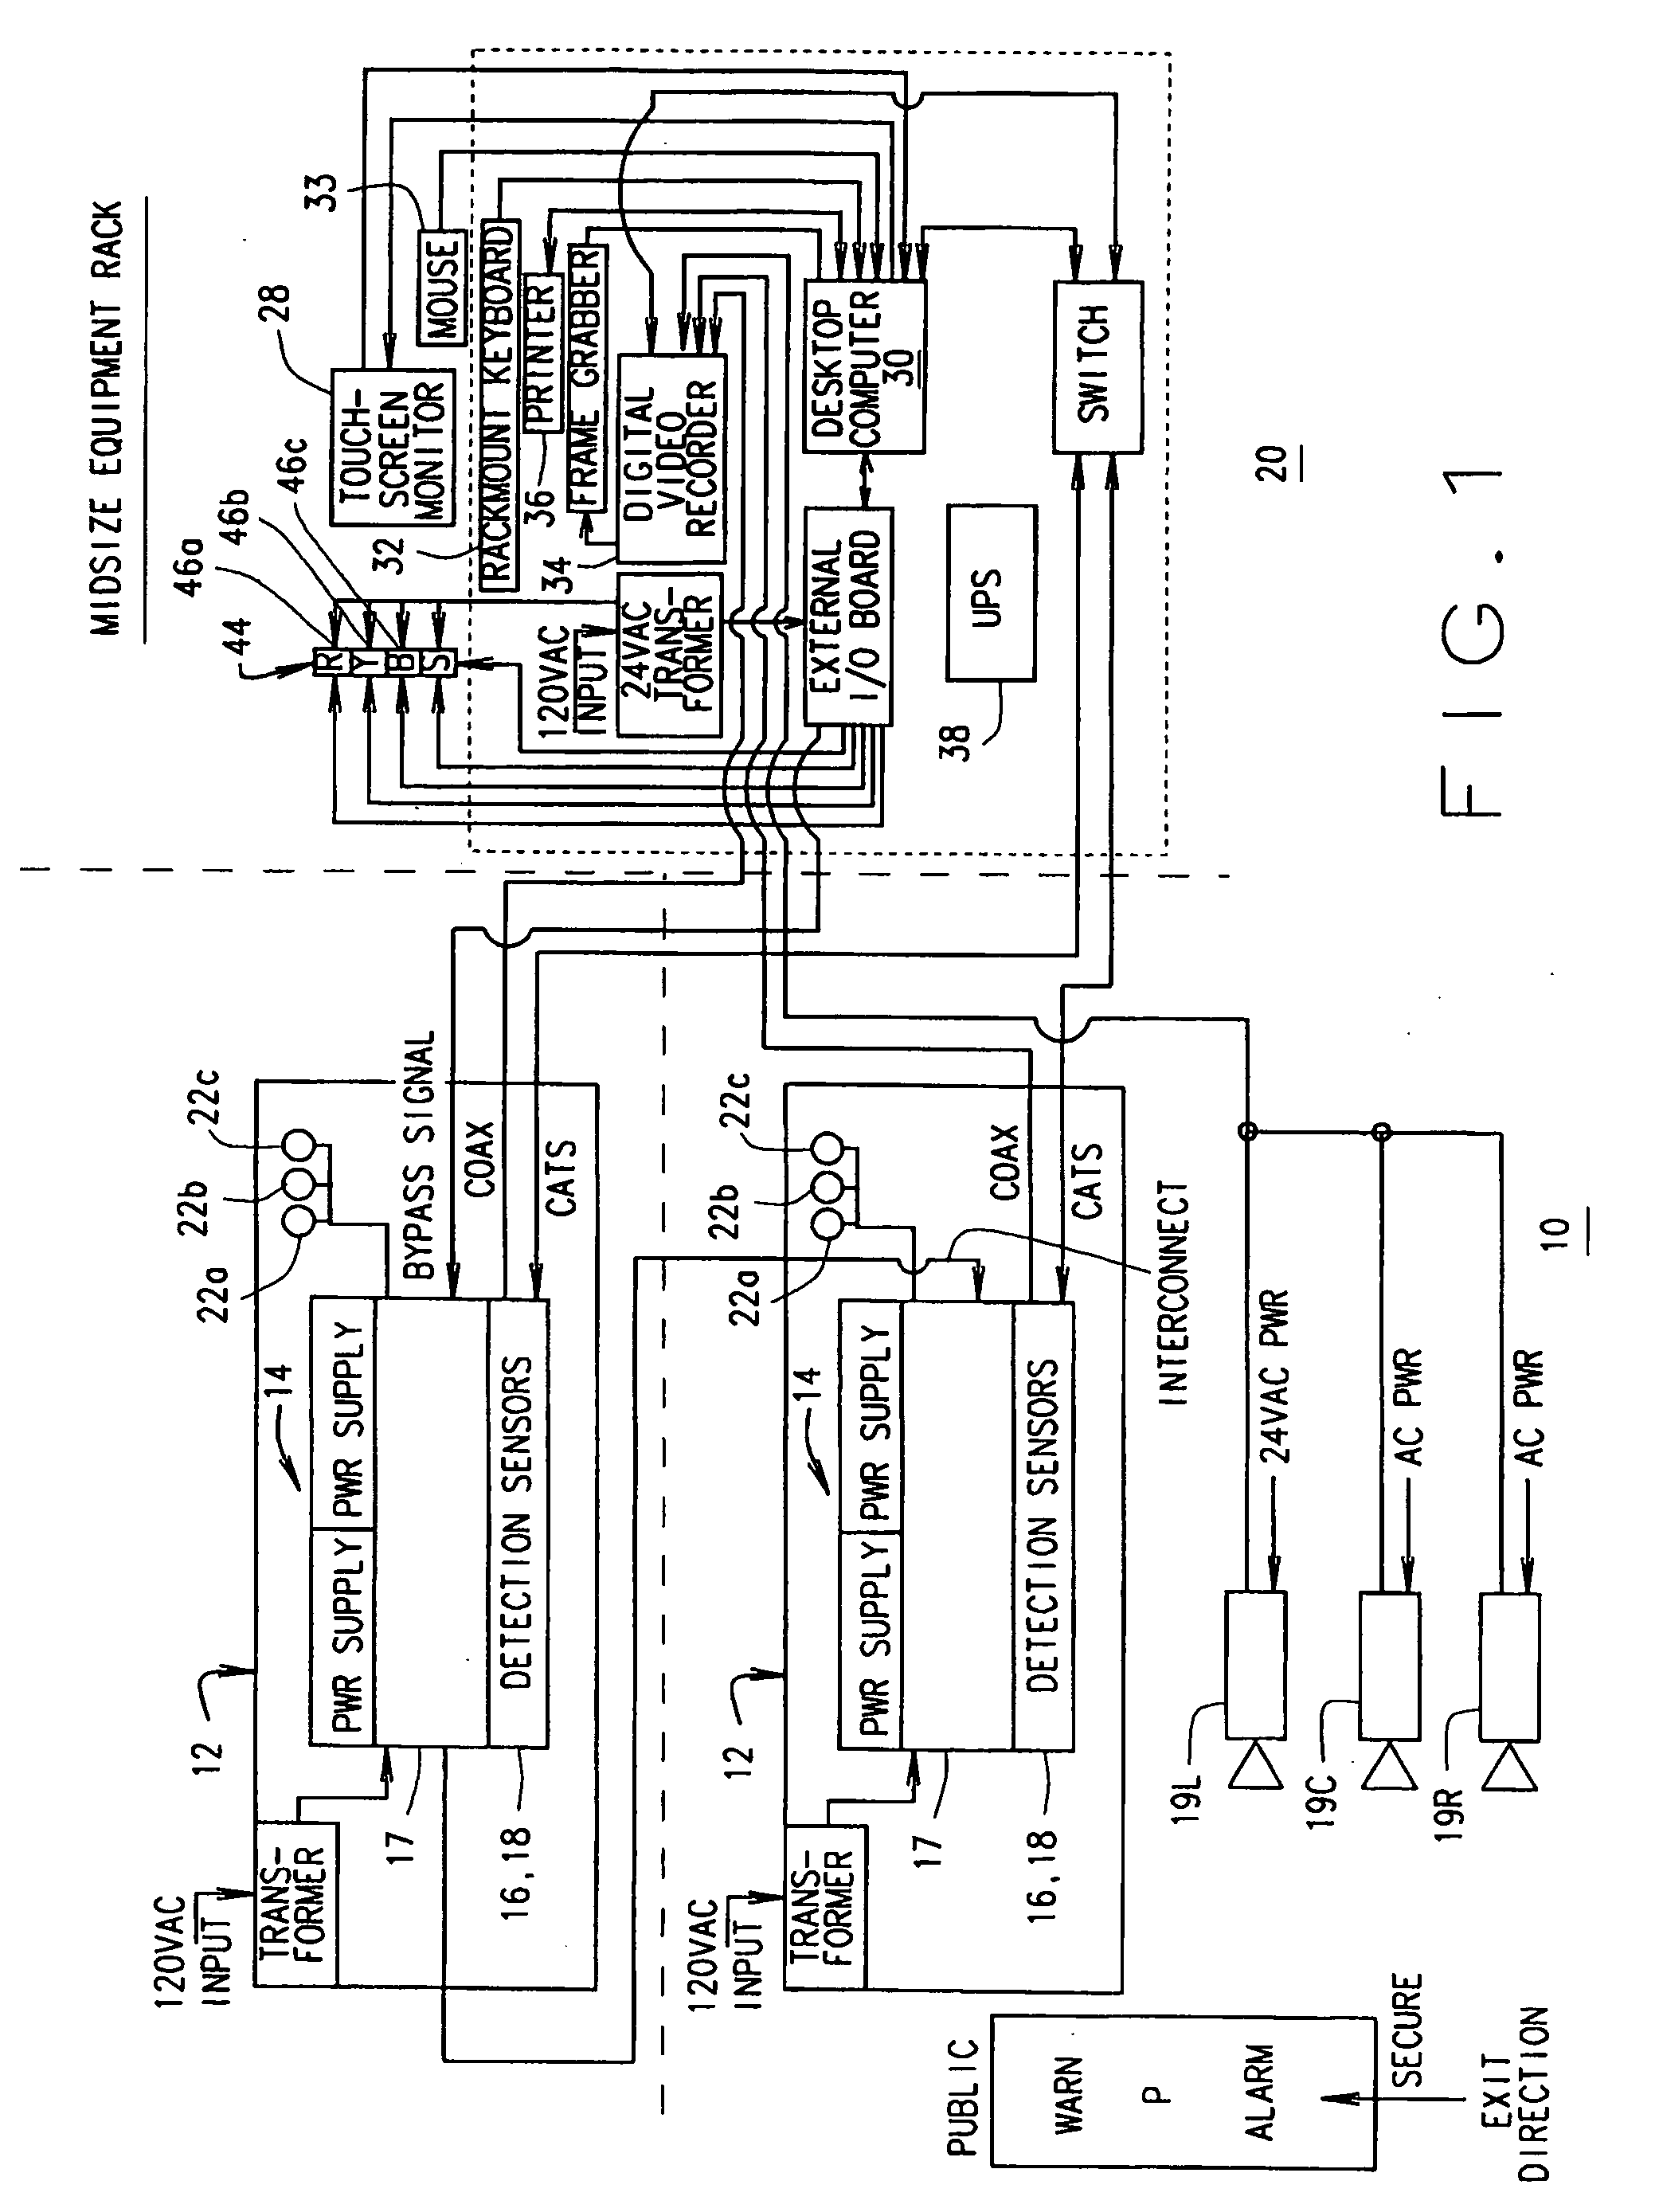 Method and system for administering remote area monitoring system